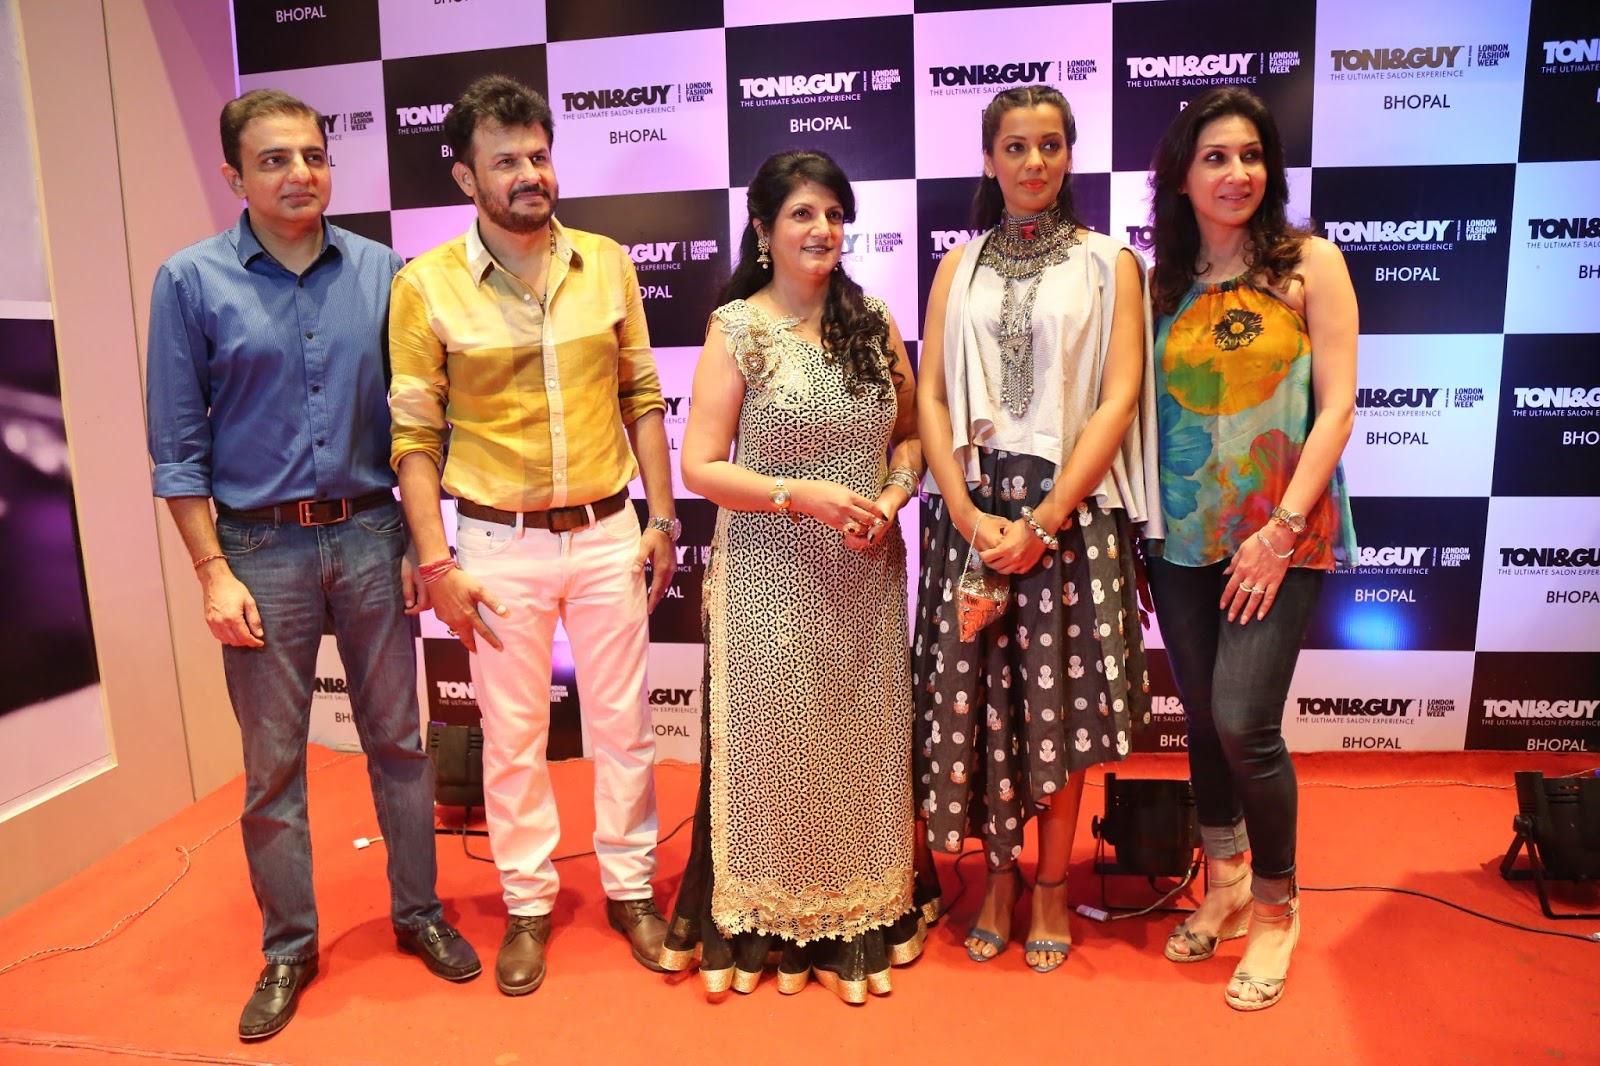 : TONI&GUY LAUNCHED IT'S FIRST SALON IN BHOPAL